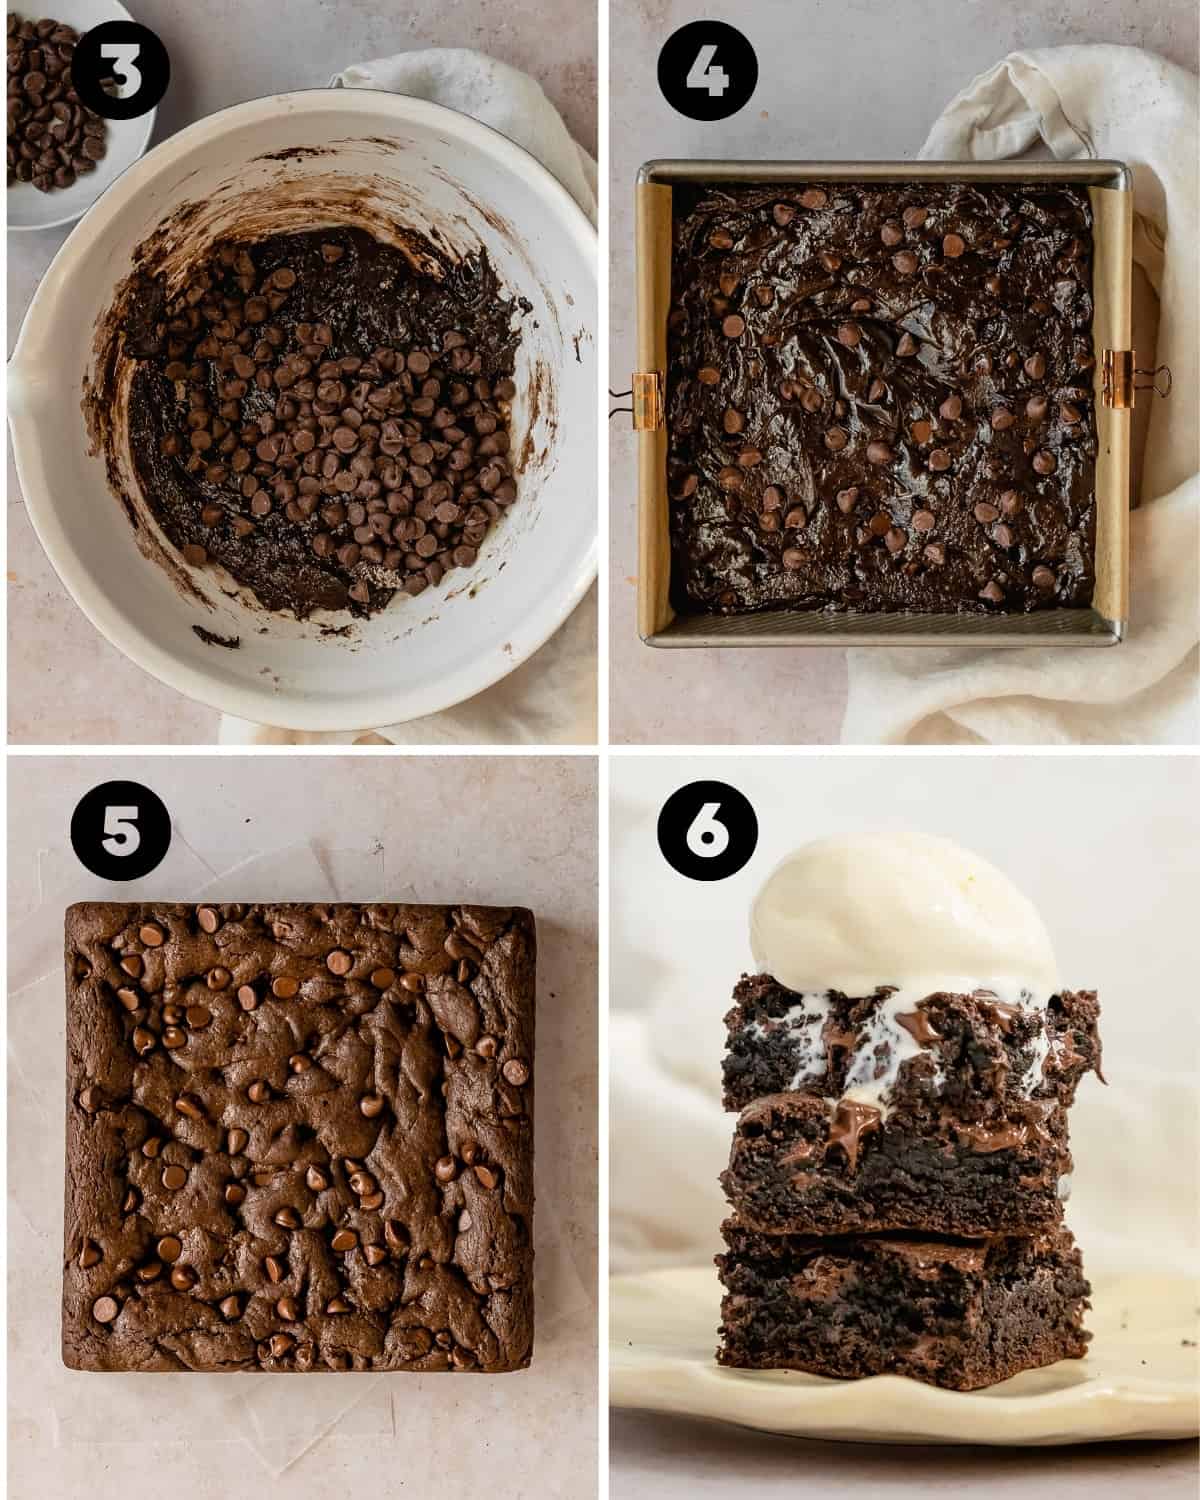 Brownies from Cake Mix Recipe Steps: Mixing semi sweet chocolate chip, pouring into a baking pan, baking and eating. 